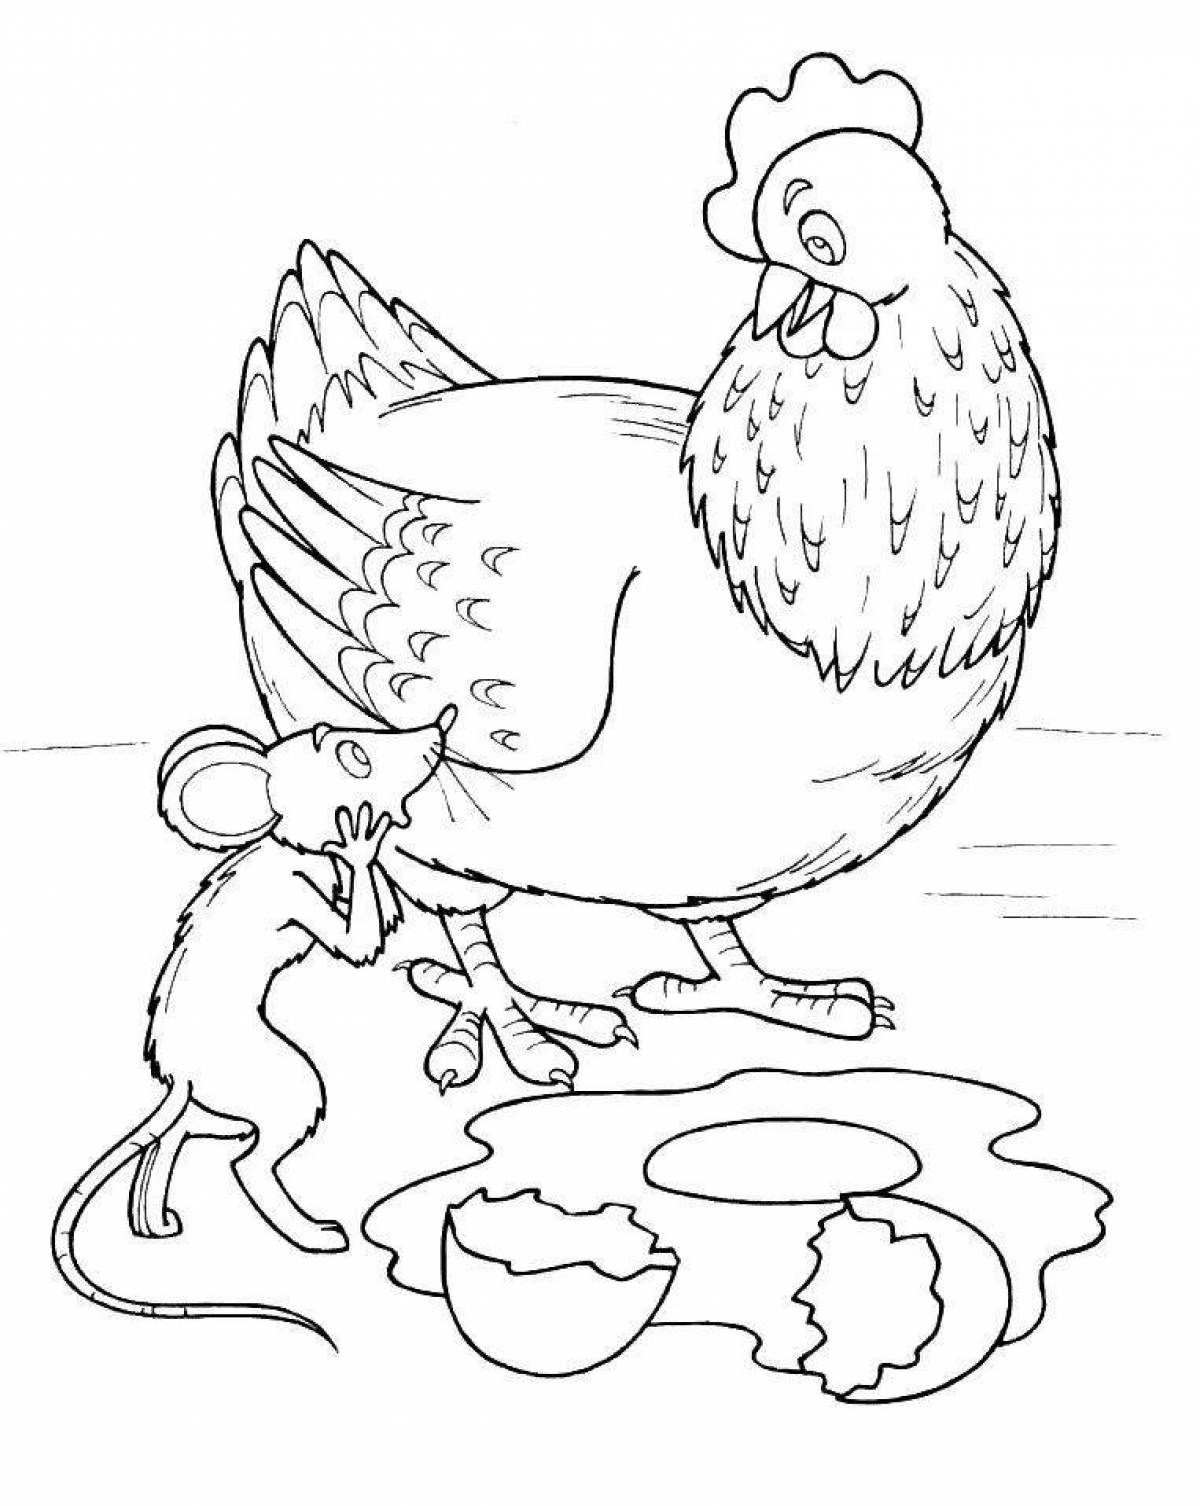 Chicken coloring page for kids